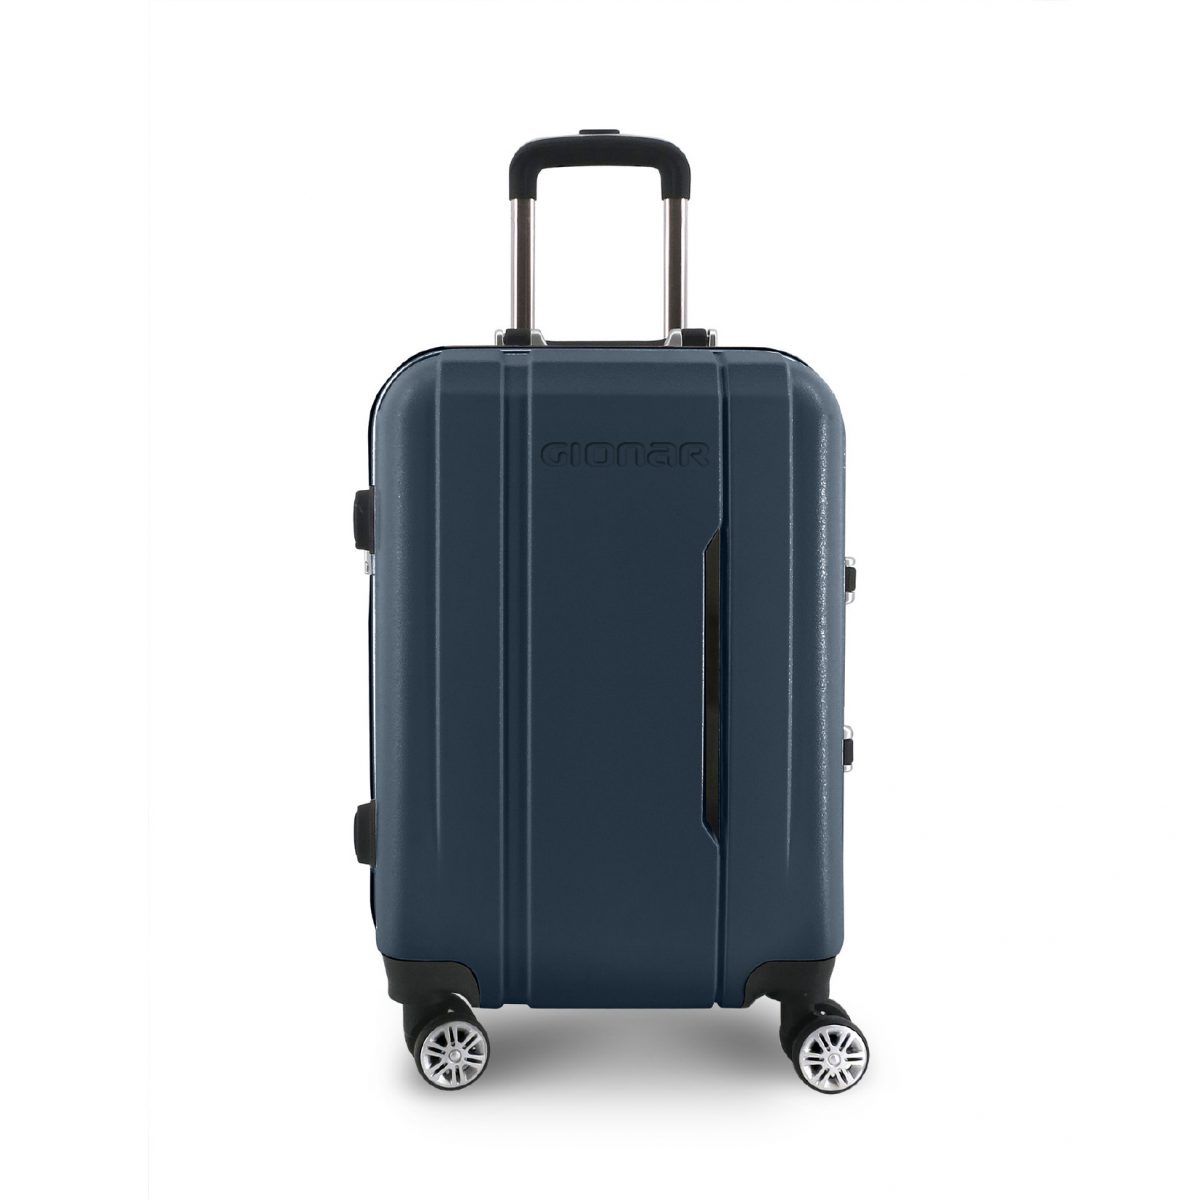 Designer Custom Luggage ABS Trolley Luggage Suitcase with Wheels